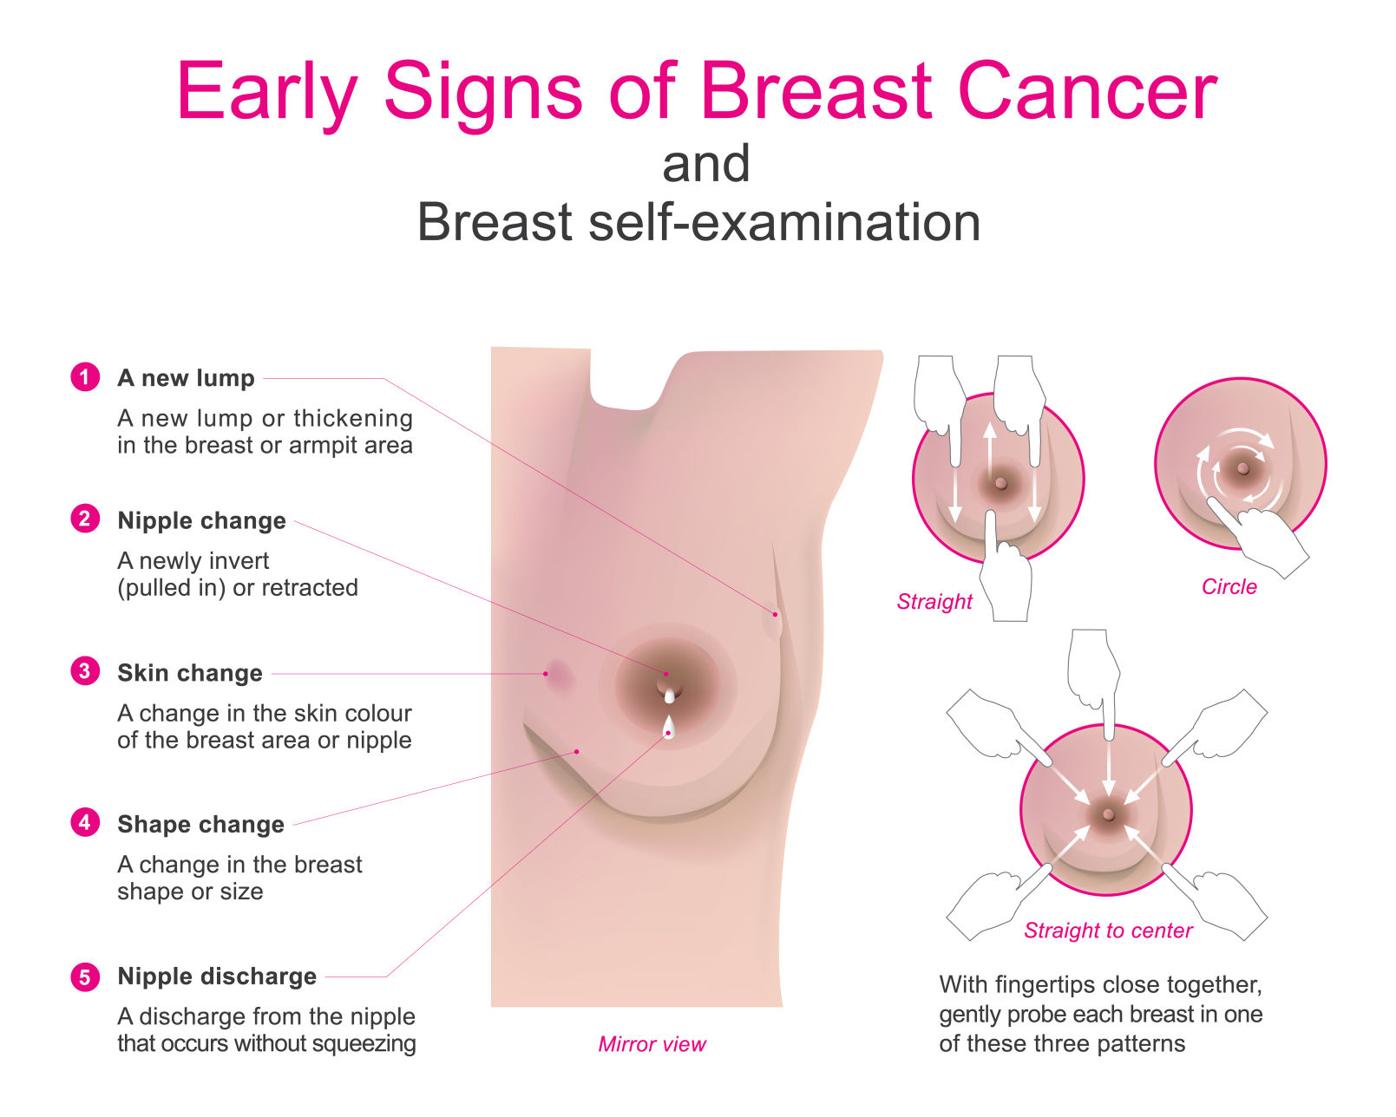 Warning Signs of Breast Cancer